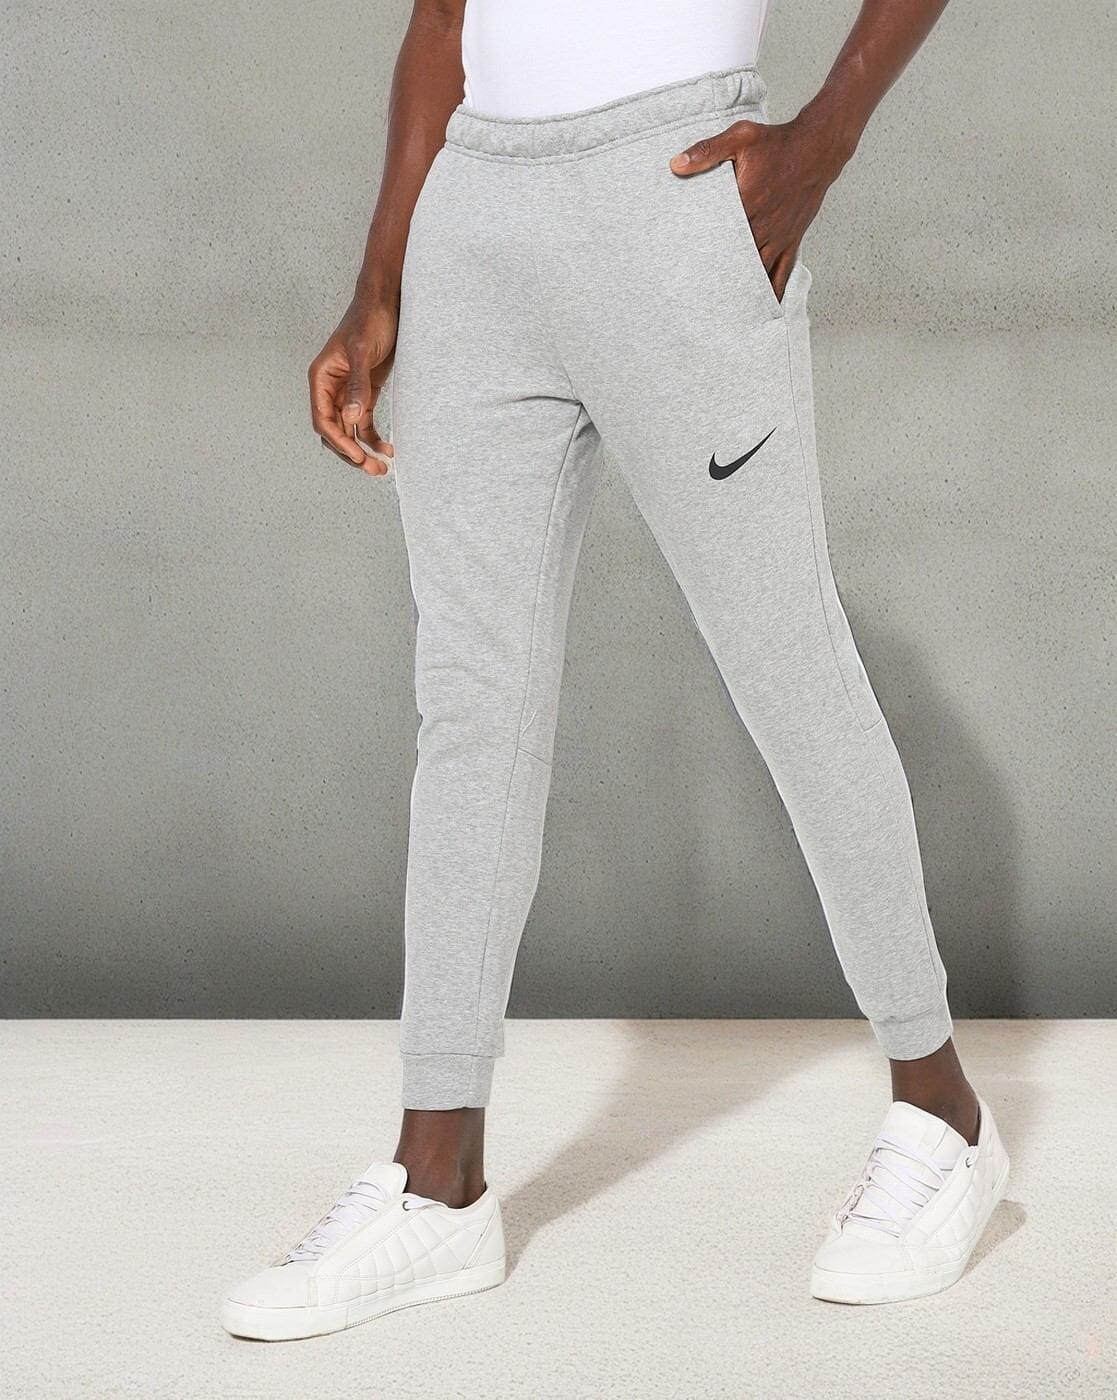 NIKE Dri-FIT Solid Women Black Track Pants - Buy NIKE Dri-FIT Solid Women  Black Track Pants Online at Best Prices in India